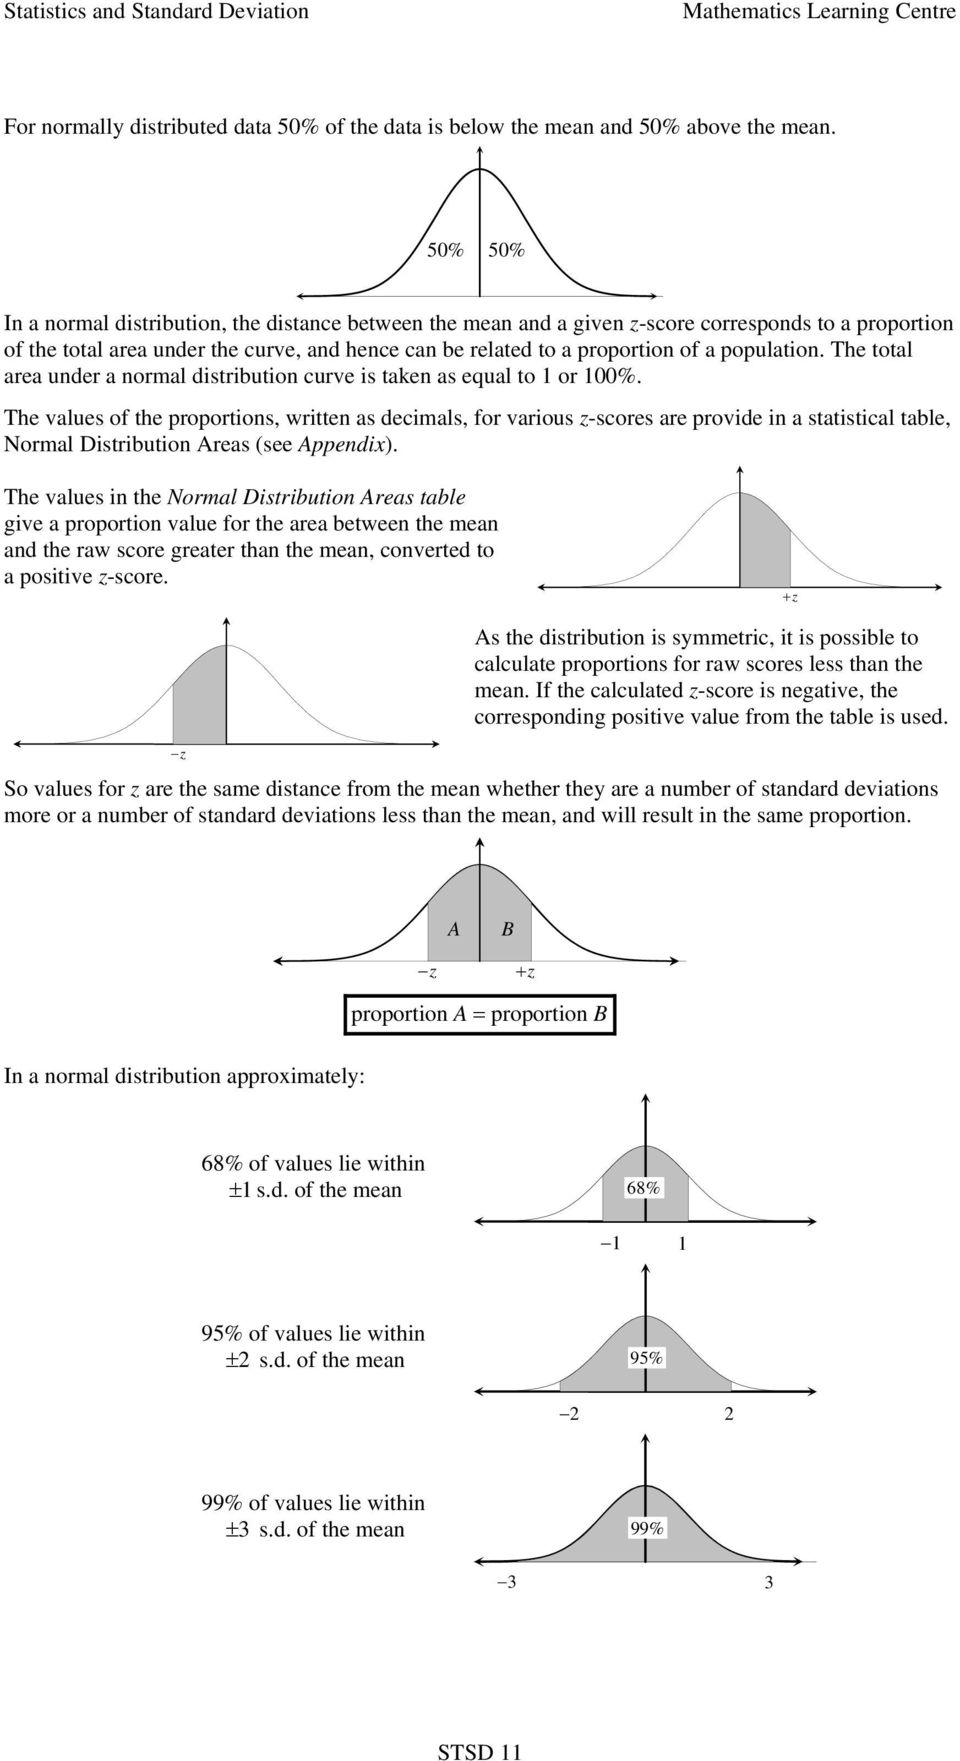 population. The total area under a normal distribution curve is taken as equal to 1 or 100%.